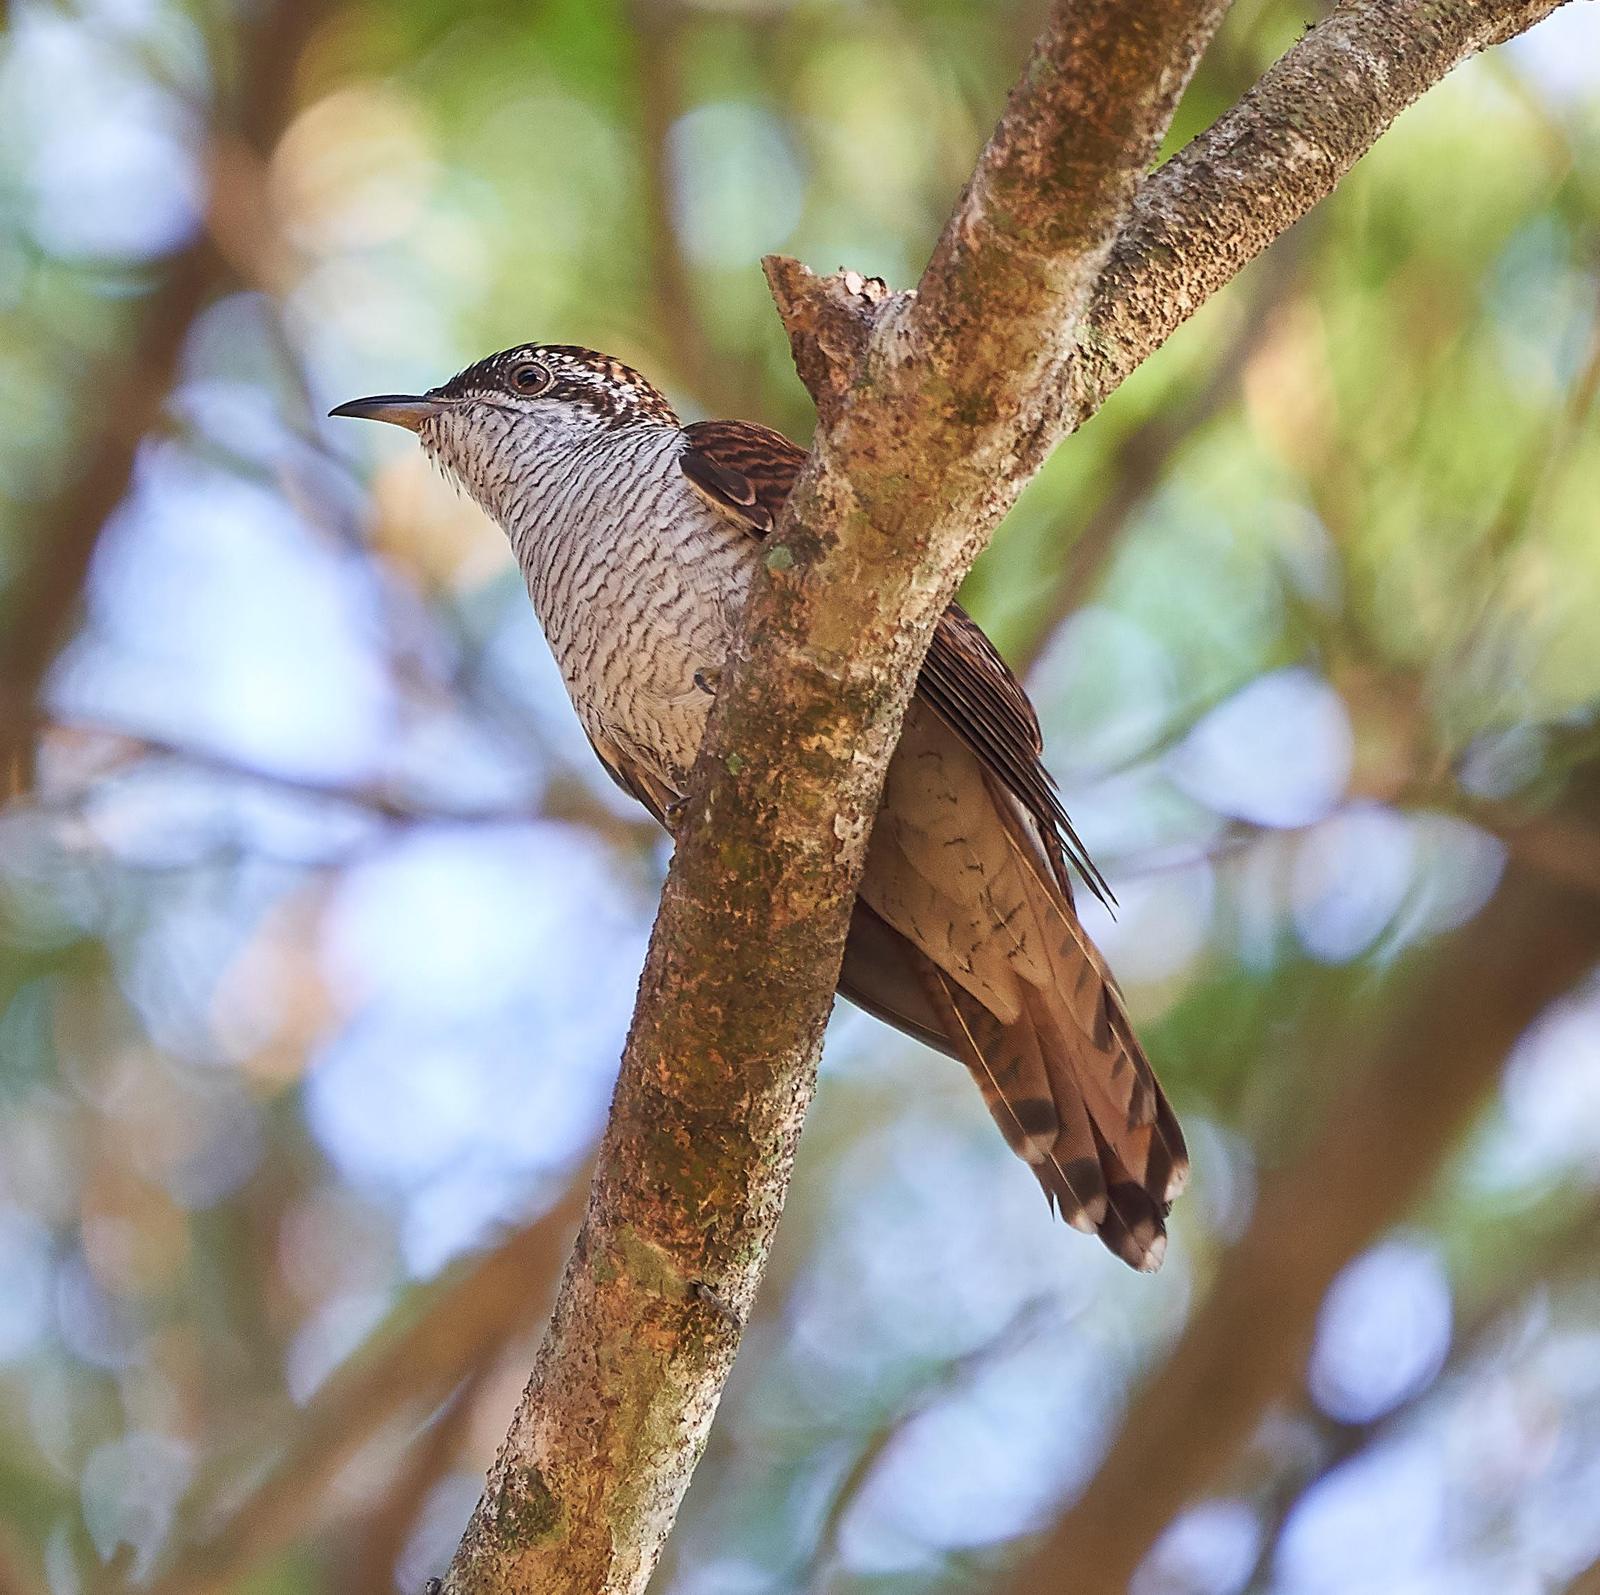 Banded Bay Cuckoo Photo by Steven Cheong